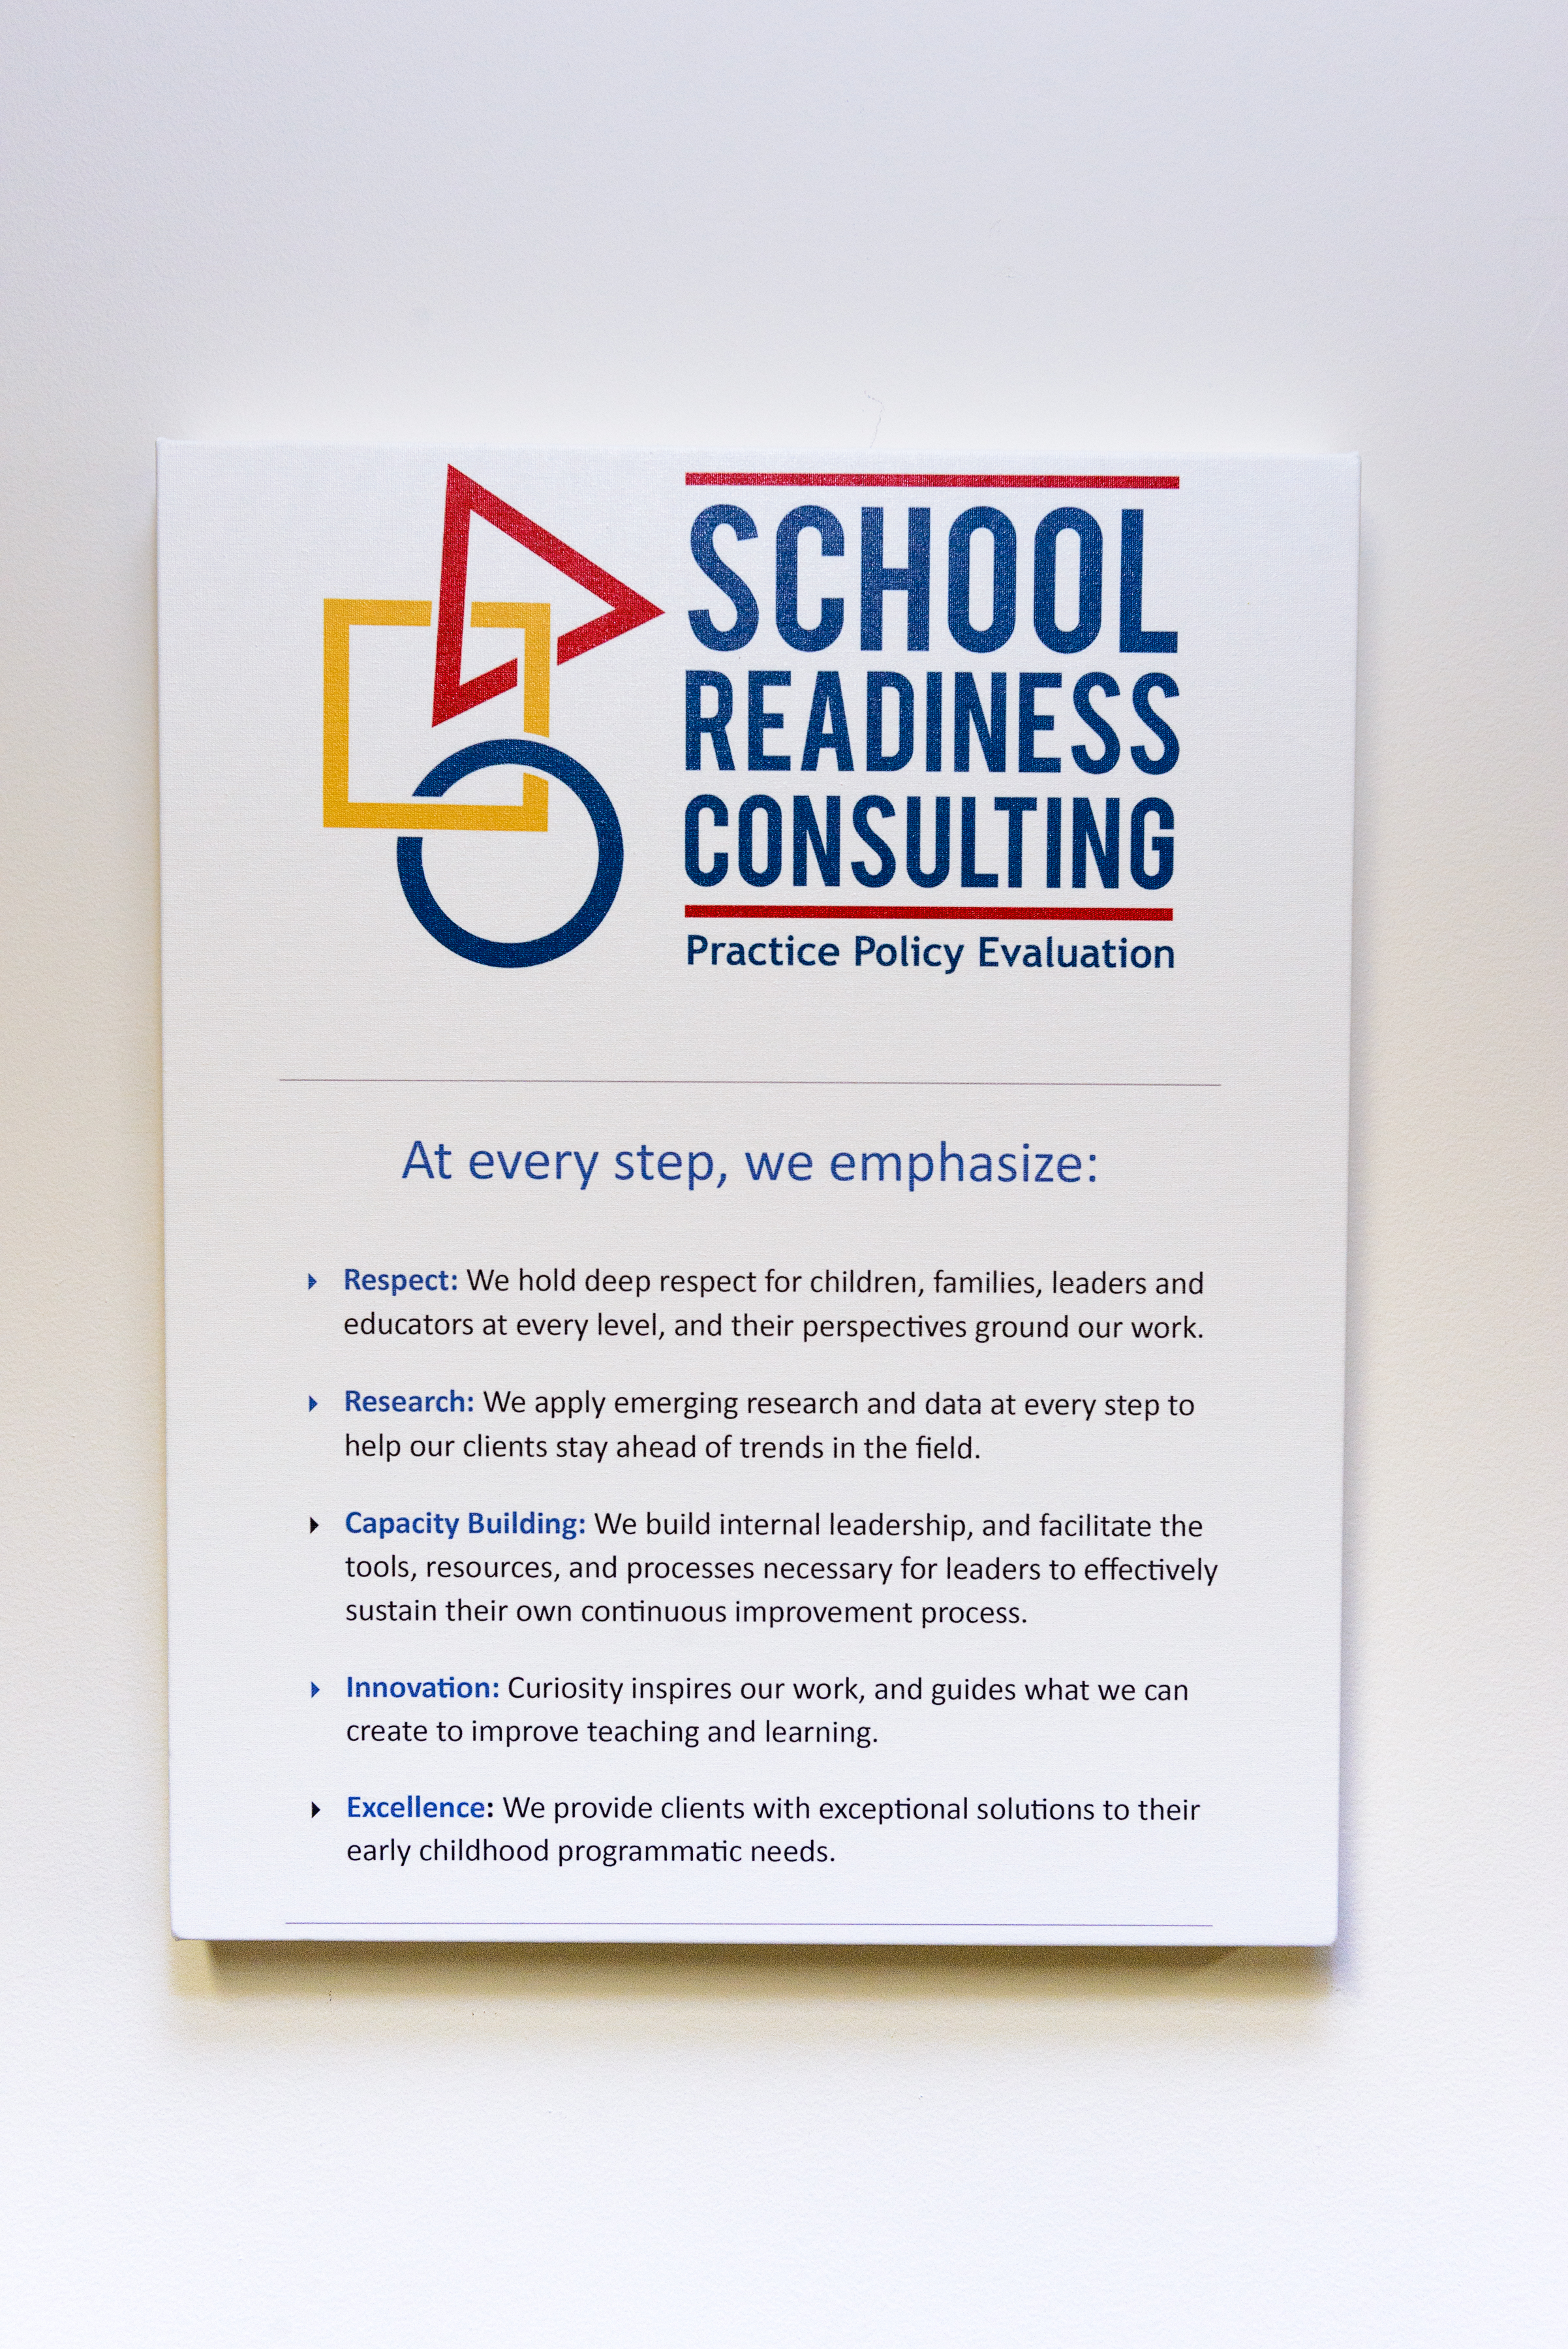 Principles of School Readiness Consulting